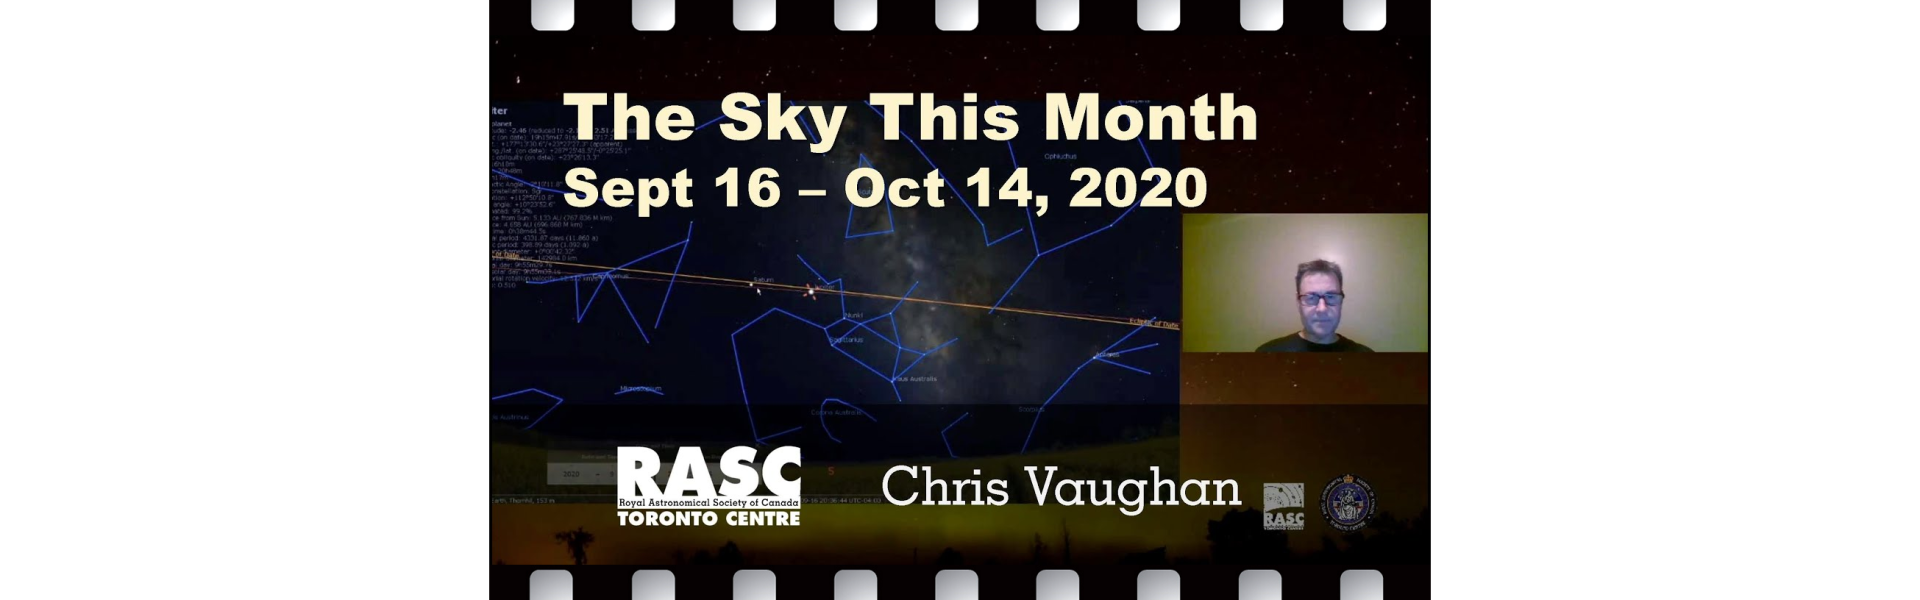 The Sky This Month Sept 16-Oct 14, 2020